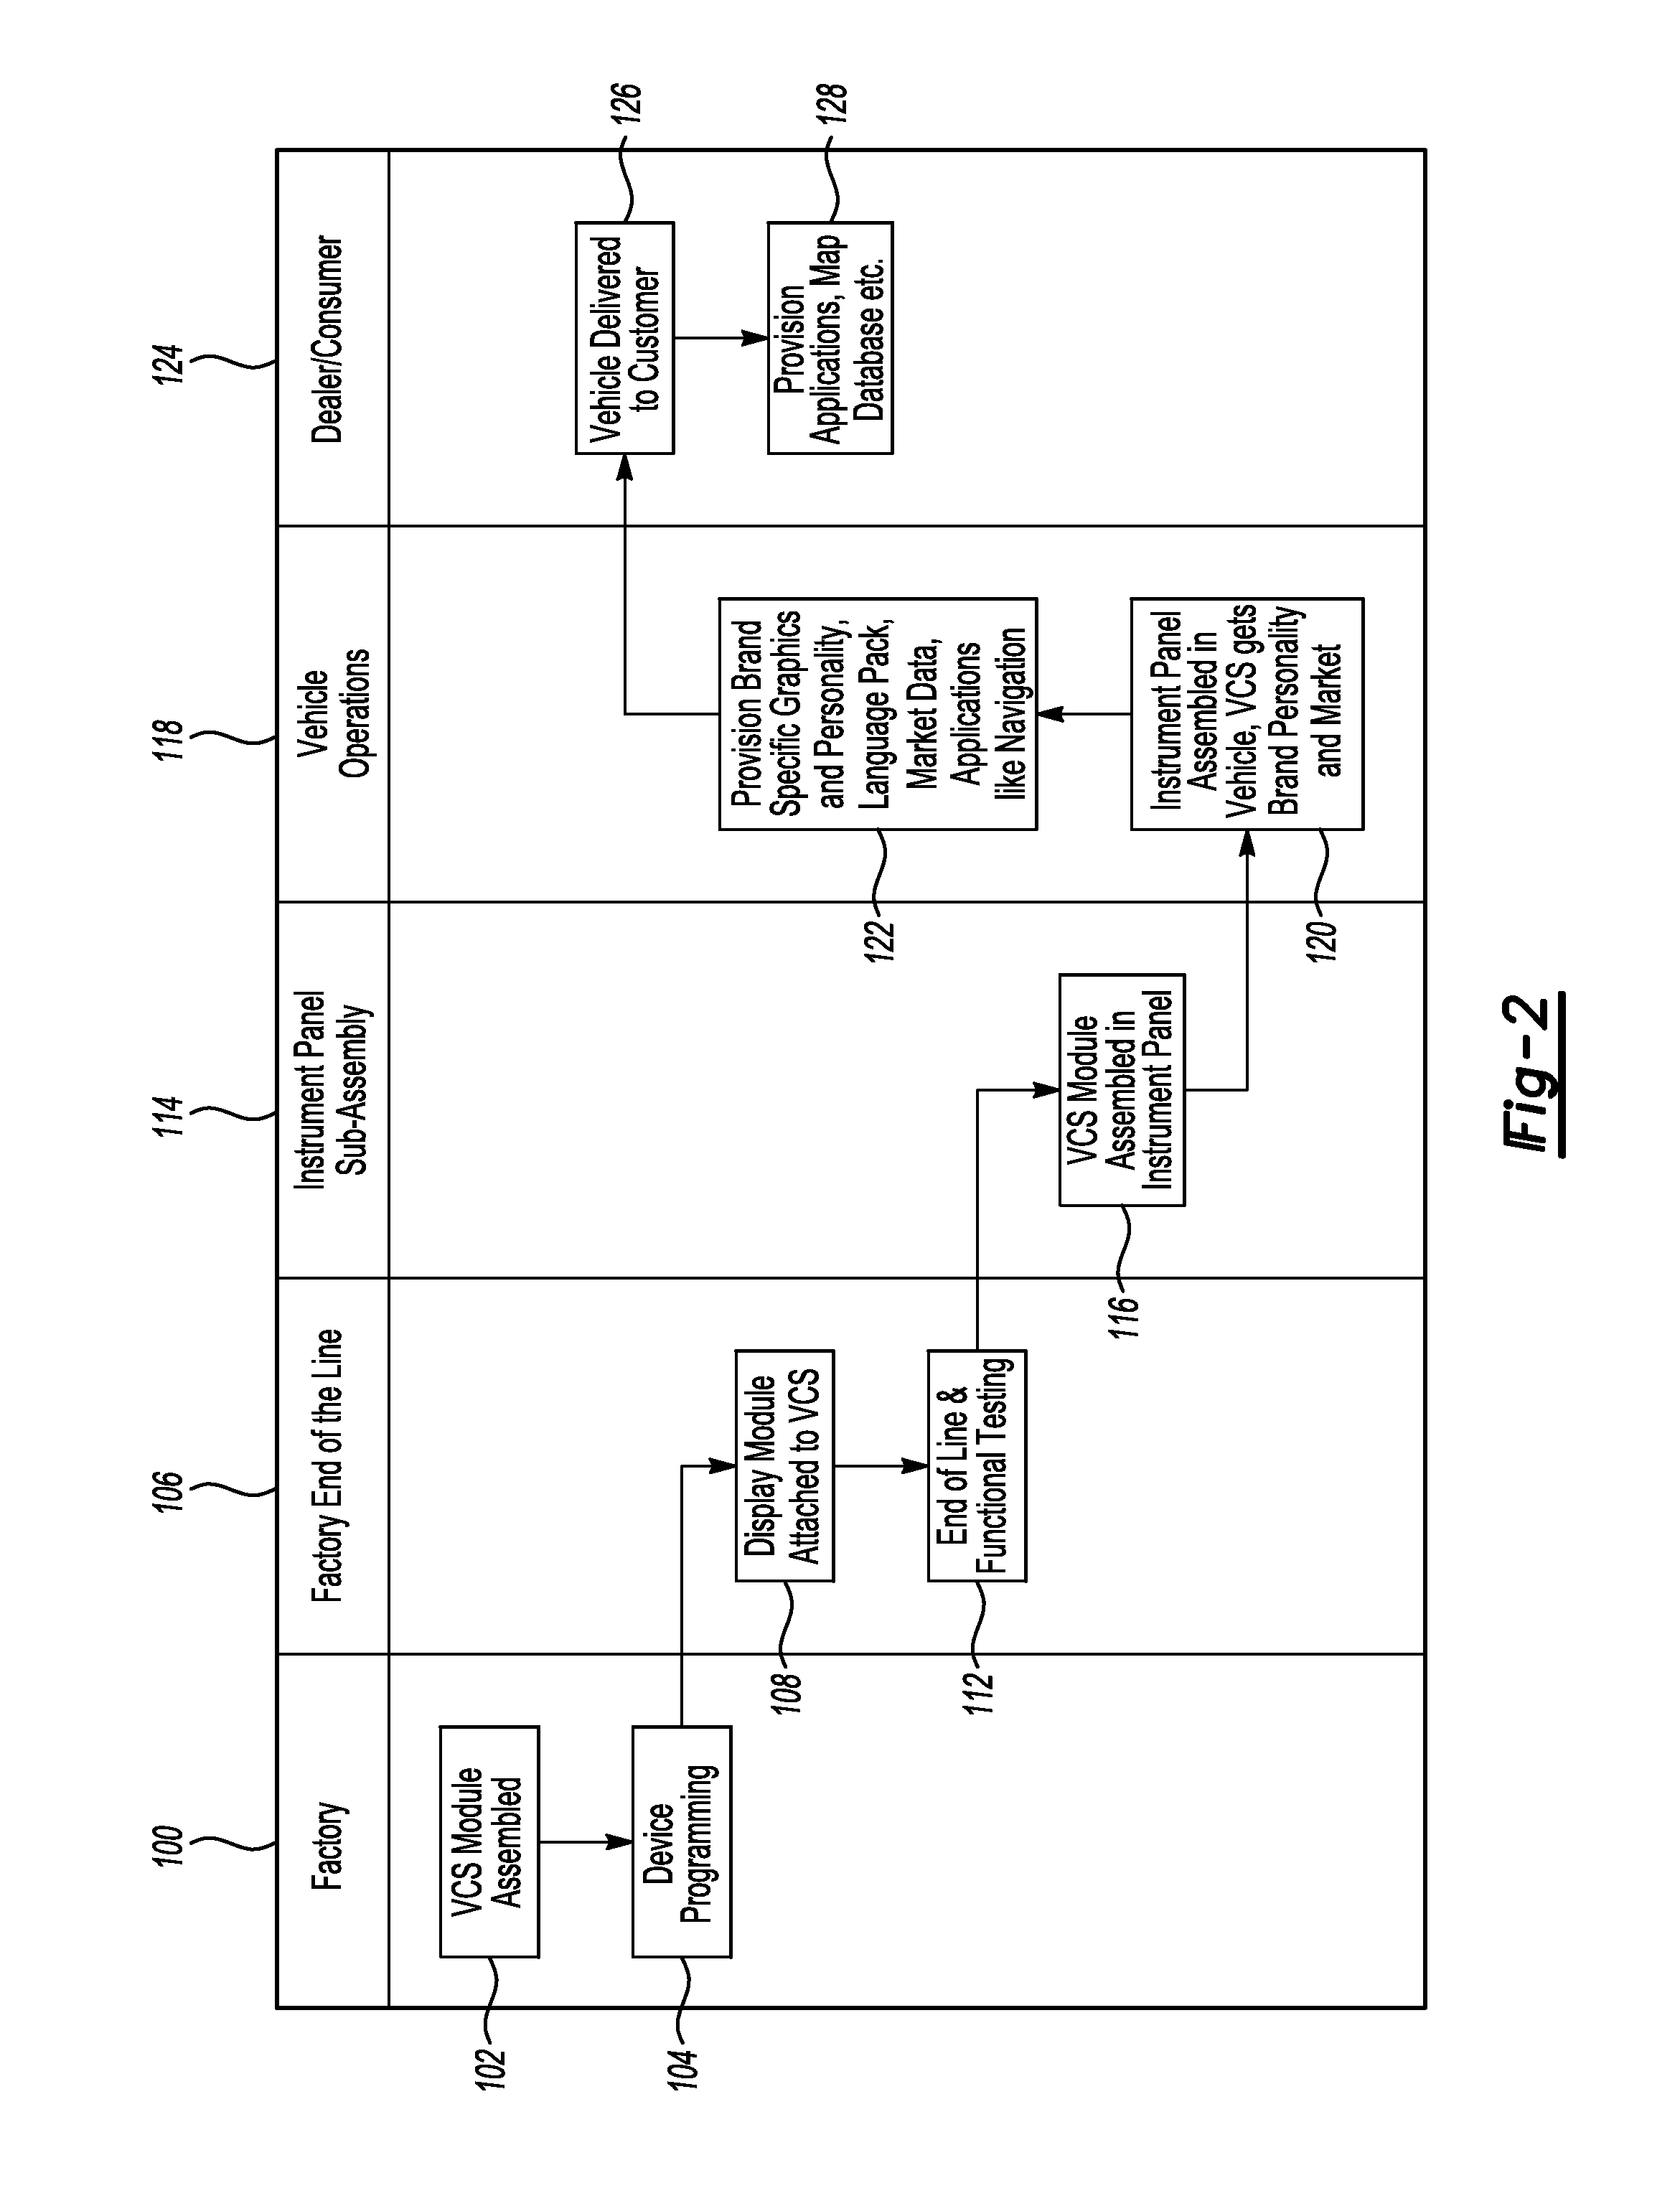 Provisioning of data to a vehicle infotainment computing system